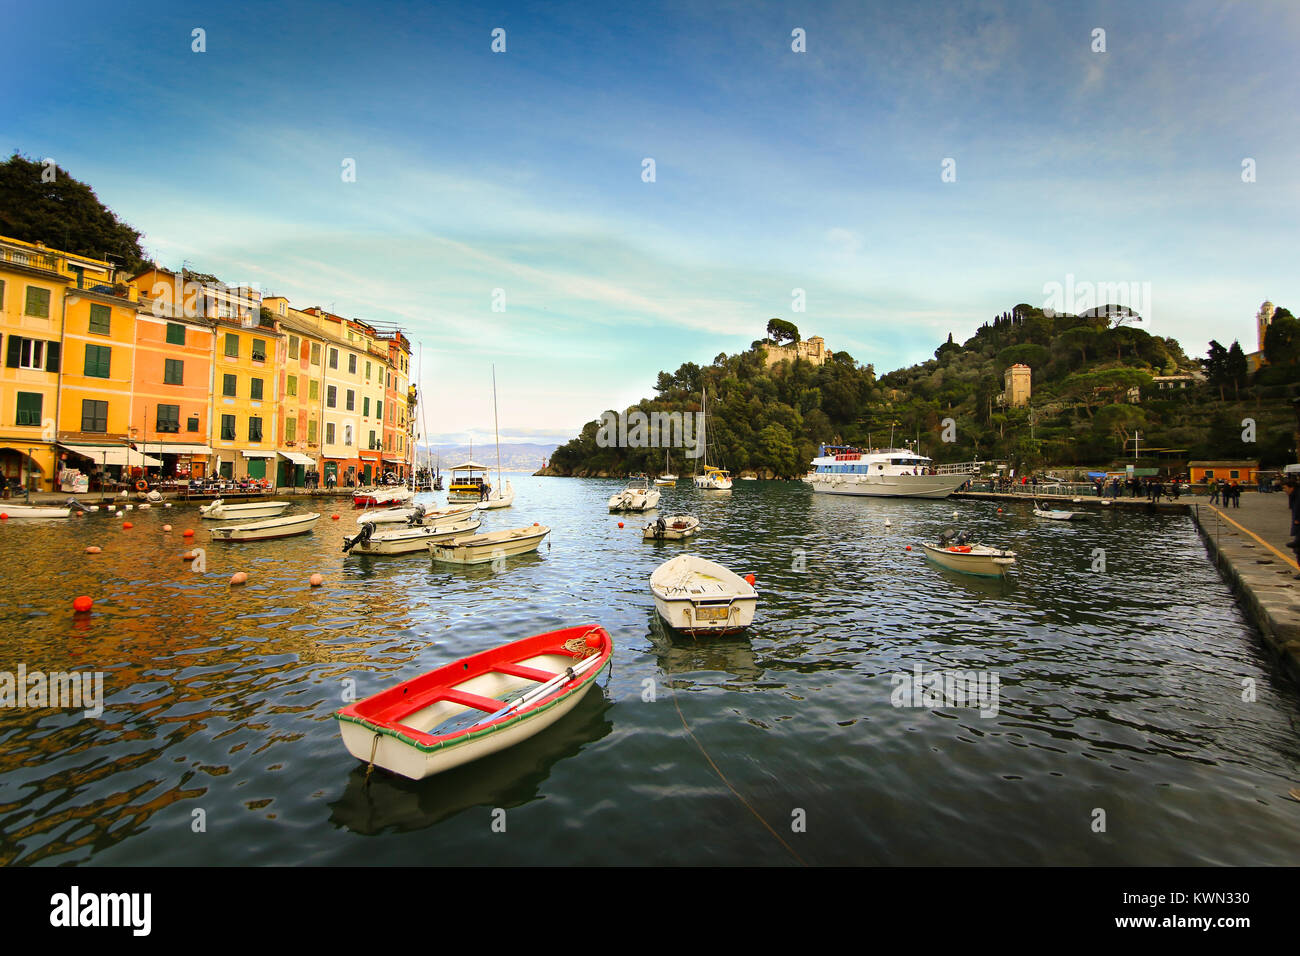 Colorful buildings on the promenade of Portofino with boats floating in the marina and blue sky background Stock Photo